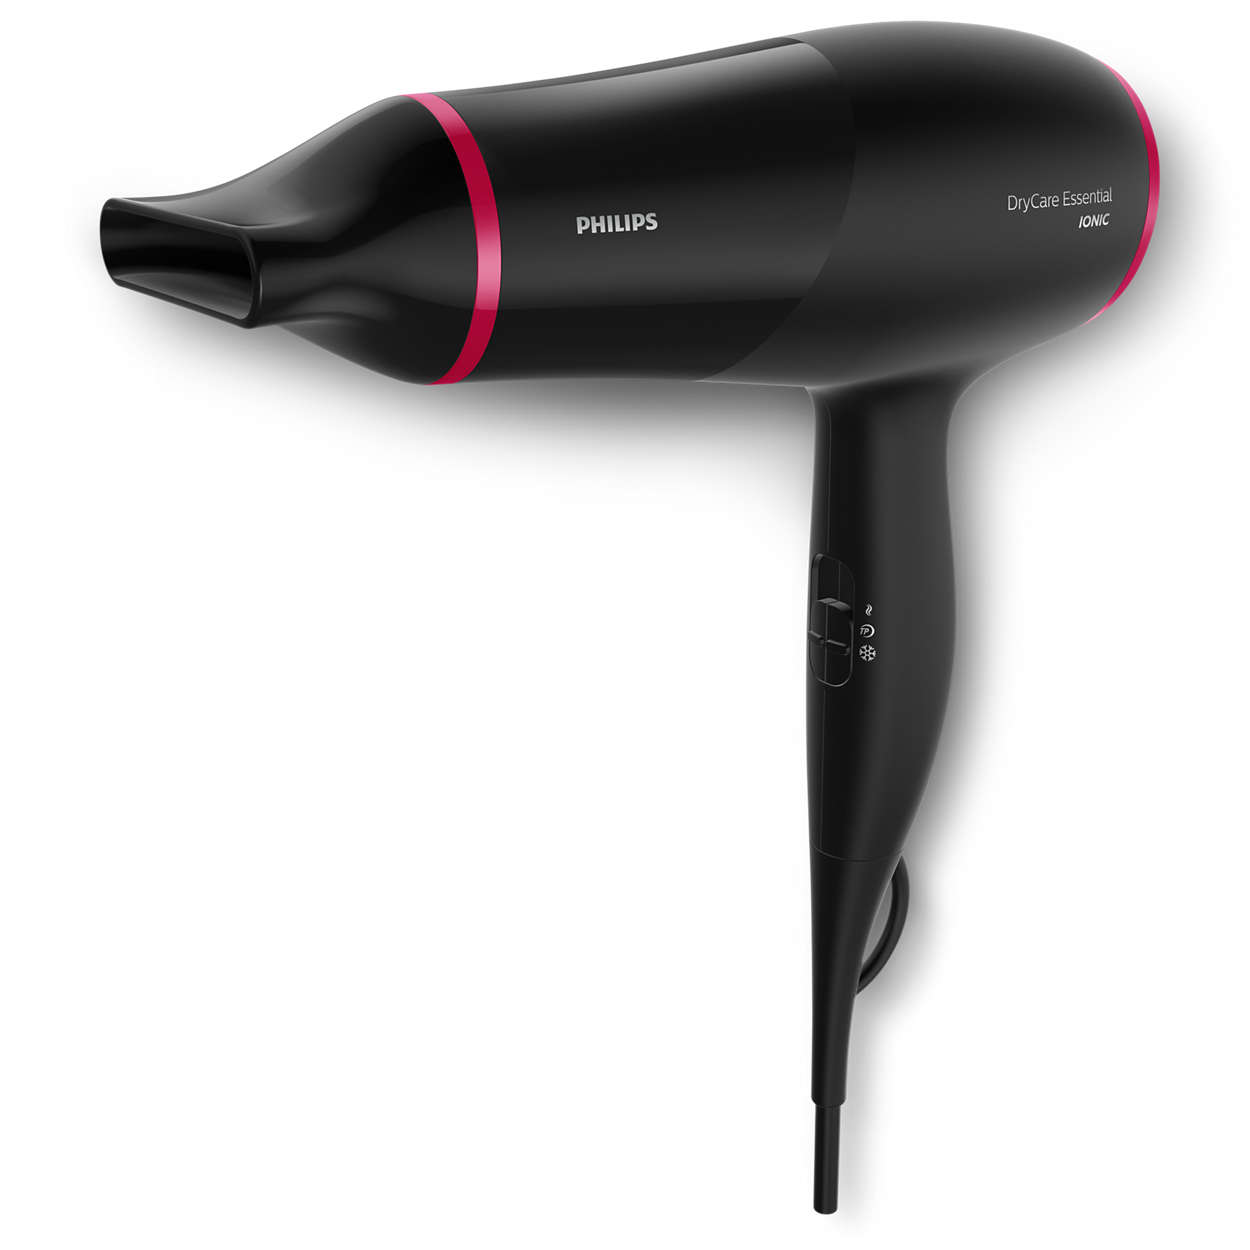 local exempt constantly DryCare Essential Energy efficient hairdryer BHD029/03 | Philips